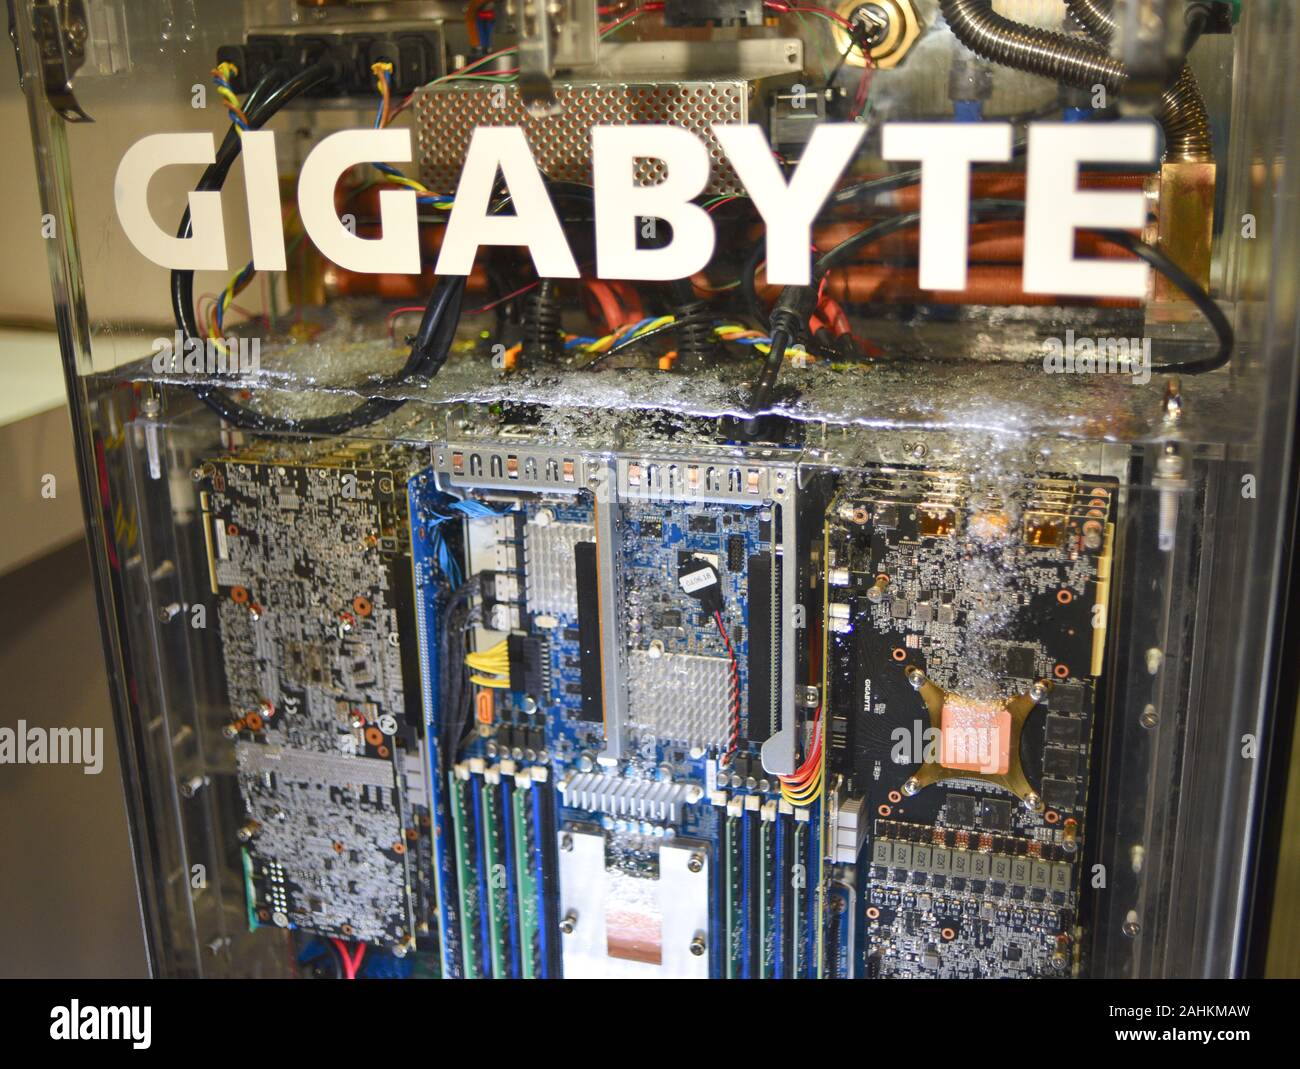 Gigabyte two-phase immersion liquid (3M Novec fluid) cooling completely  submerged data center/server type computer at CES, Las Vegas, NV, USA Stock  Photo - Alamy